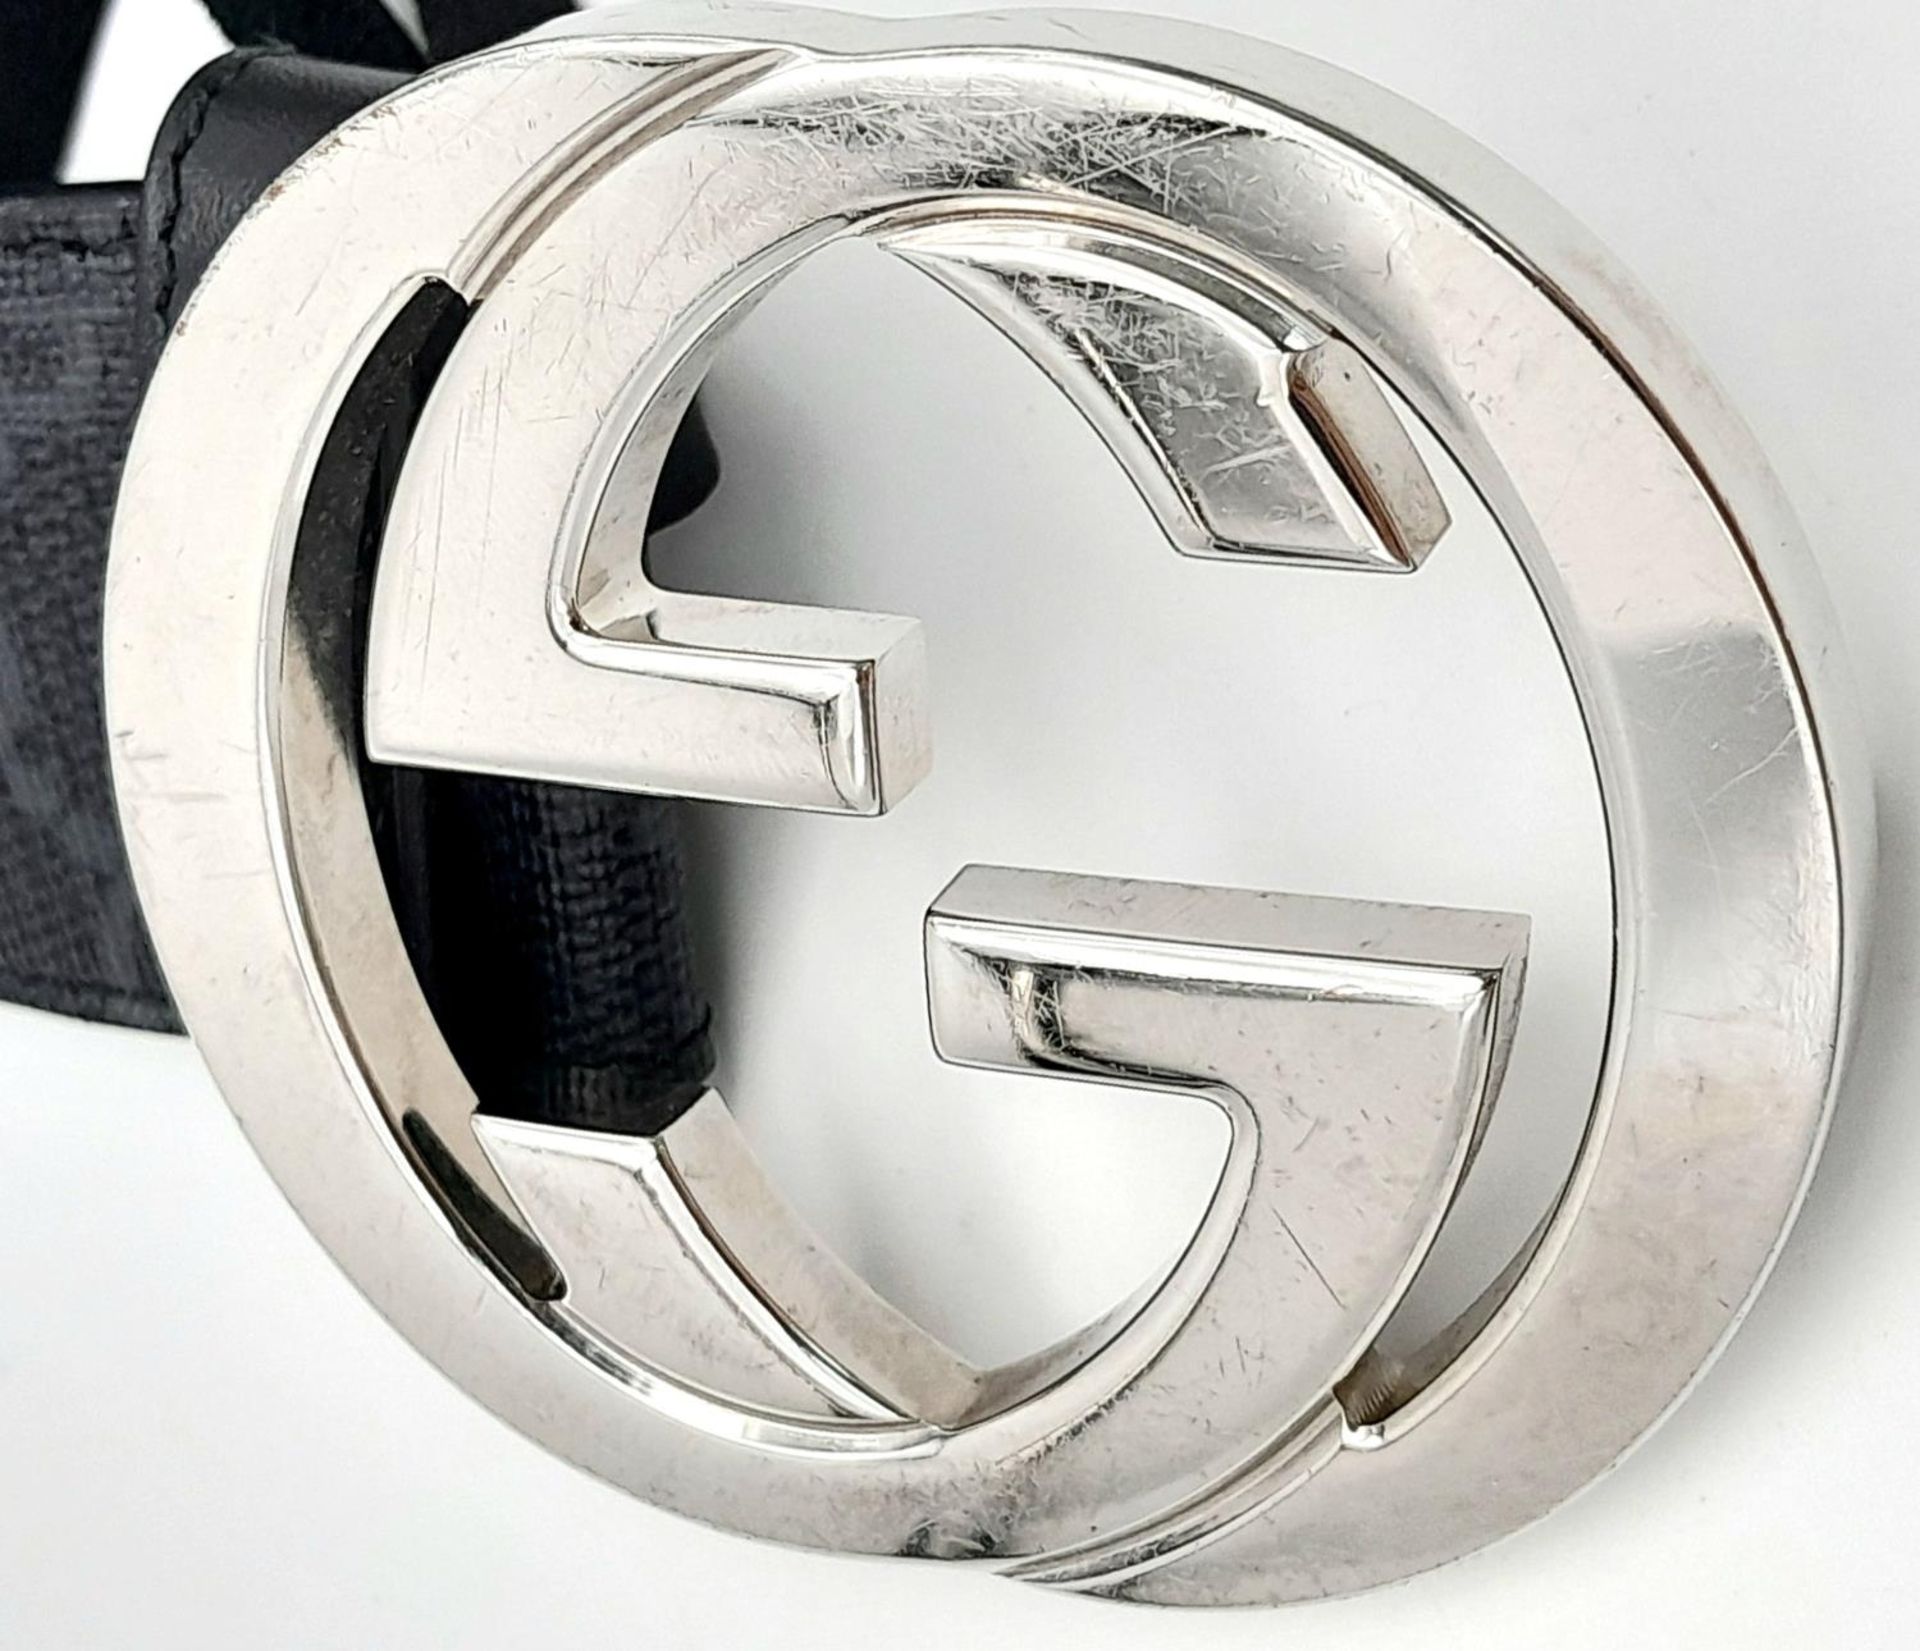 A Gucci Black with Grey Monogram Men's GG Belt. Silver-toned hardware. Approximately 104.5cm length, - Image 7 of 7